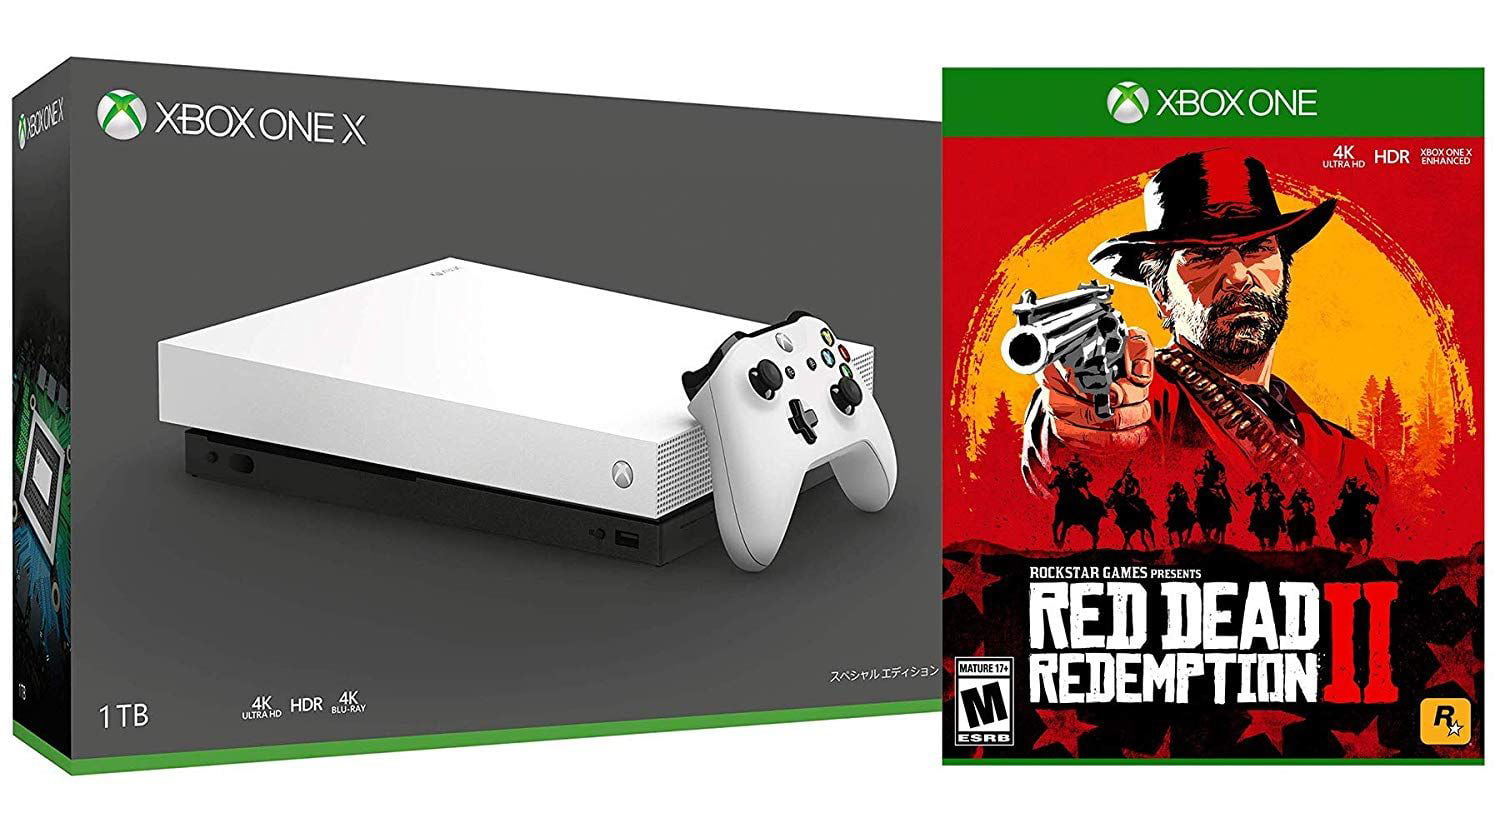 Rentmeester Armoedig Martin Luther King Junior Microsoft Xbox One X White Special Edition RDR2 Bundle: Xbox One X Enhanced Red  Dead Redemption 2 and Limited White Edition Xbox One X 1TB 4K HDR Gaming  Console - Walmart.com